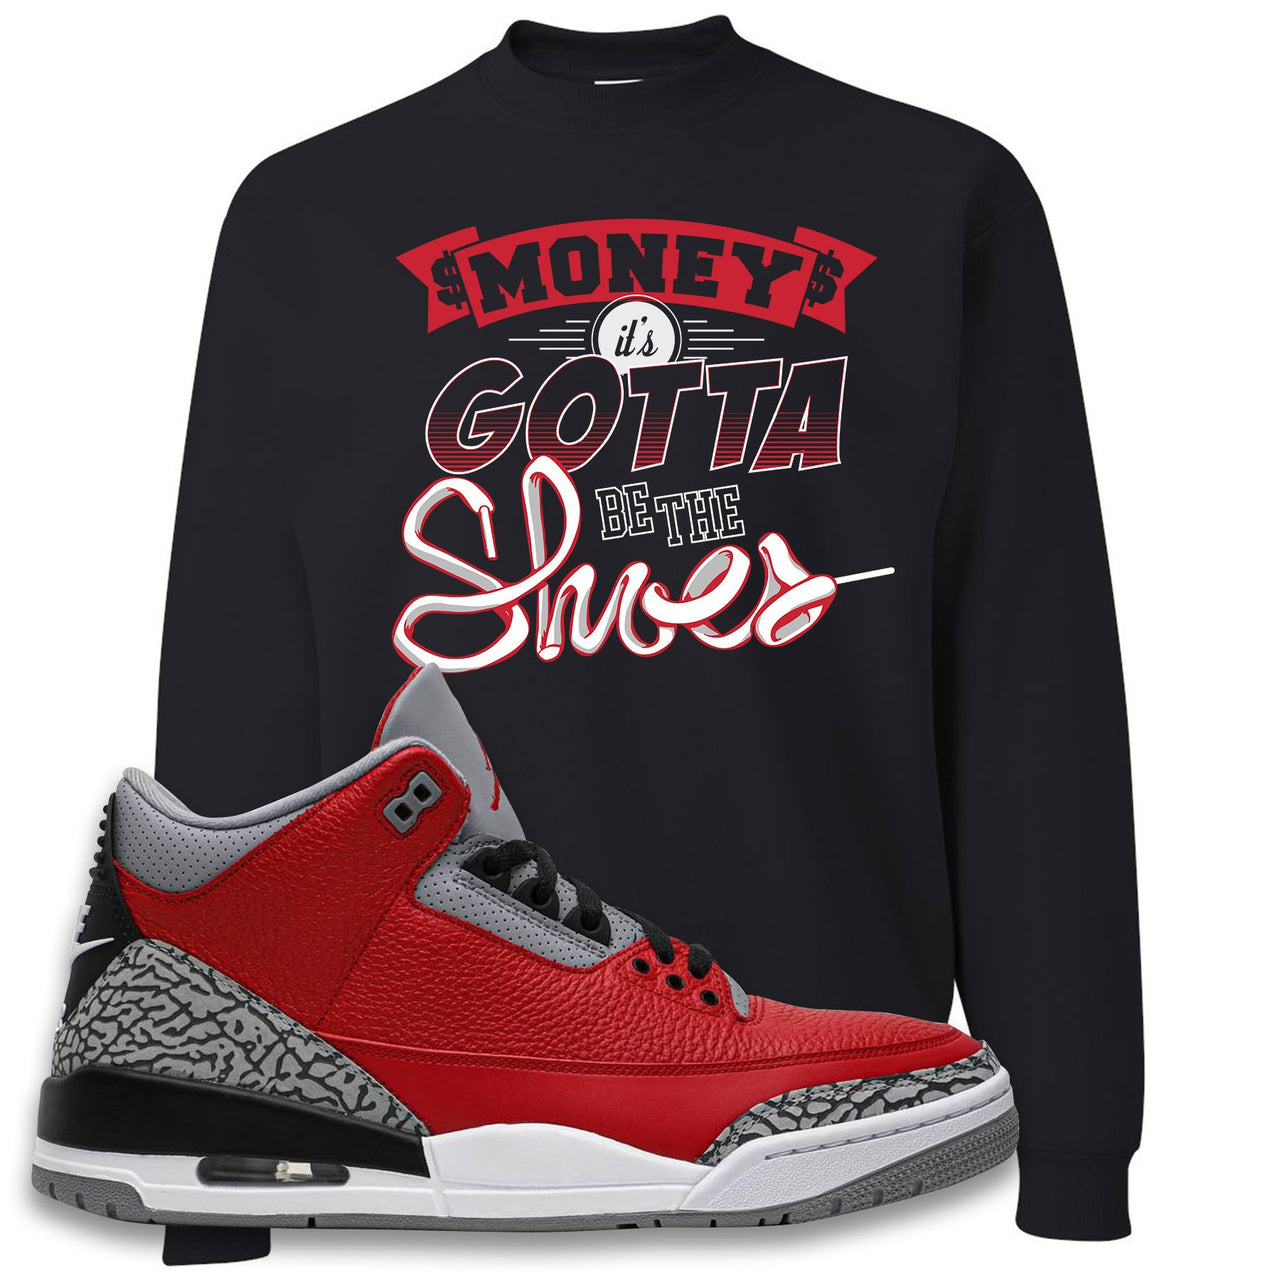 Chicago Exclusive Jordan 3 Red Cement Sneaker Black Crewneck Sweatshirt | Crewneck to match Jordan 3 All Star Red Cement Shoes | Money Its The Shoes